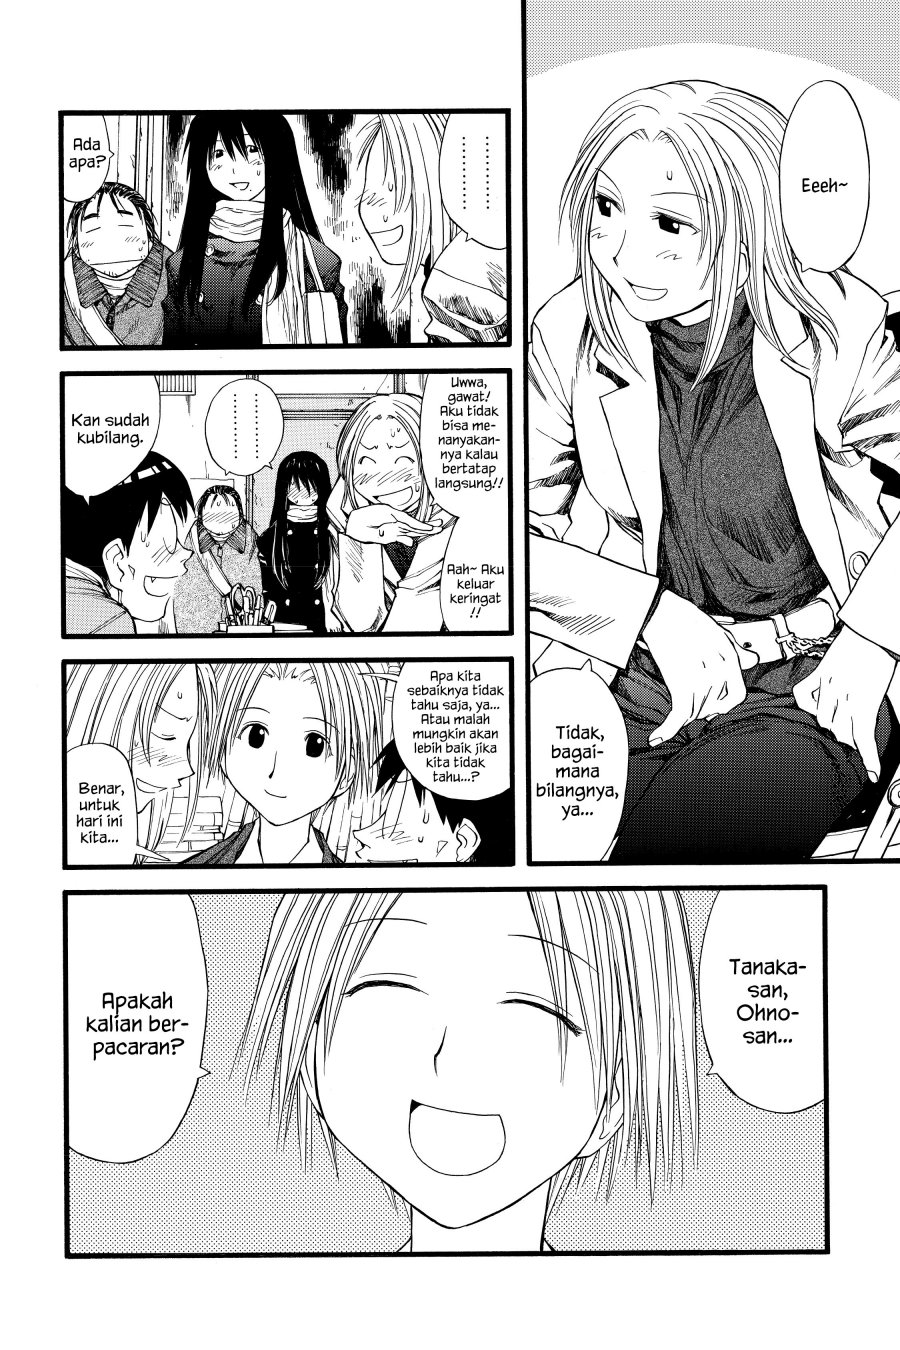 Genshiken – The Society for the Study of Modern Visual Culture Chapter 23 Image 7